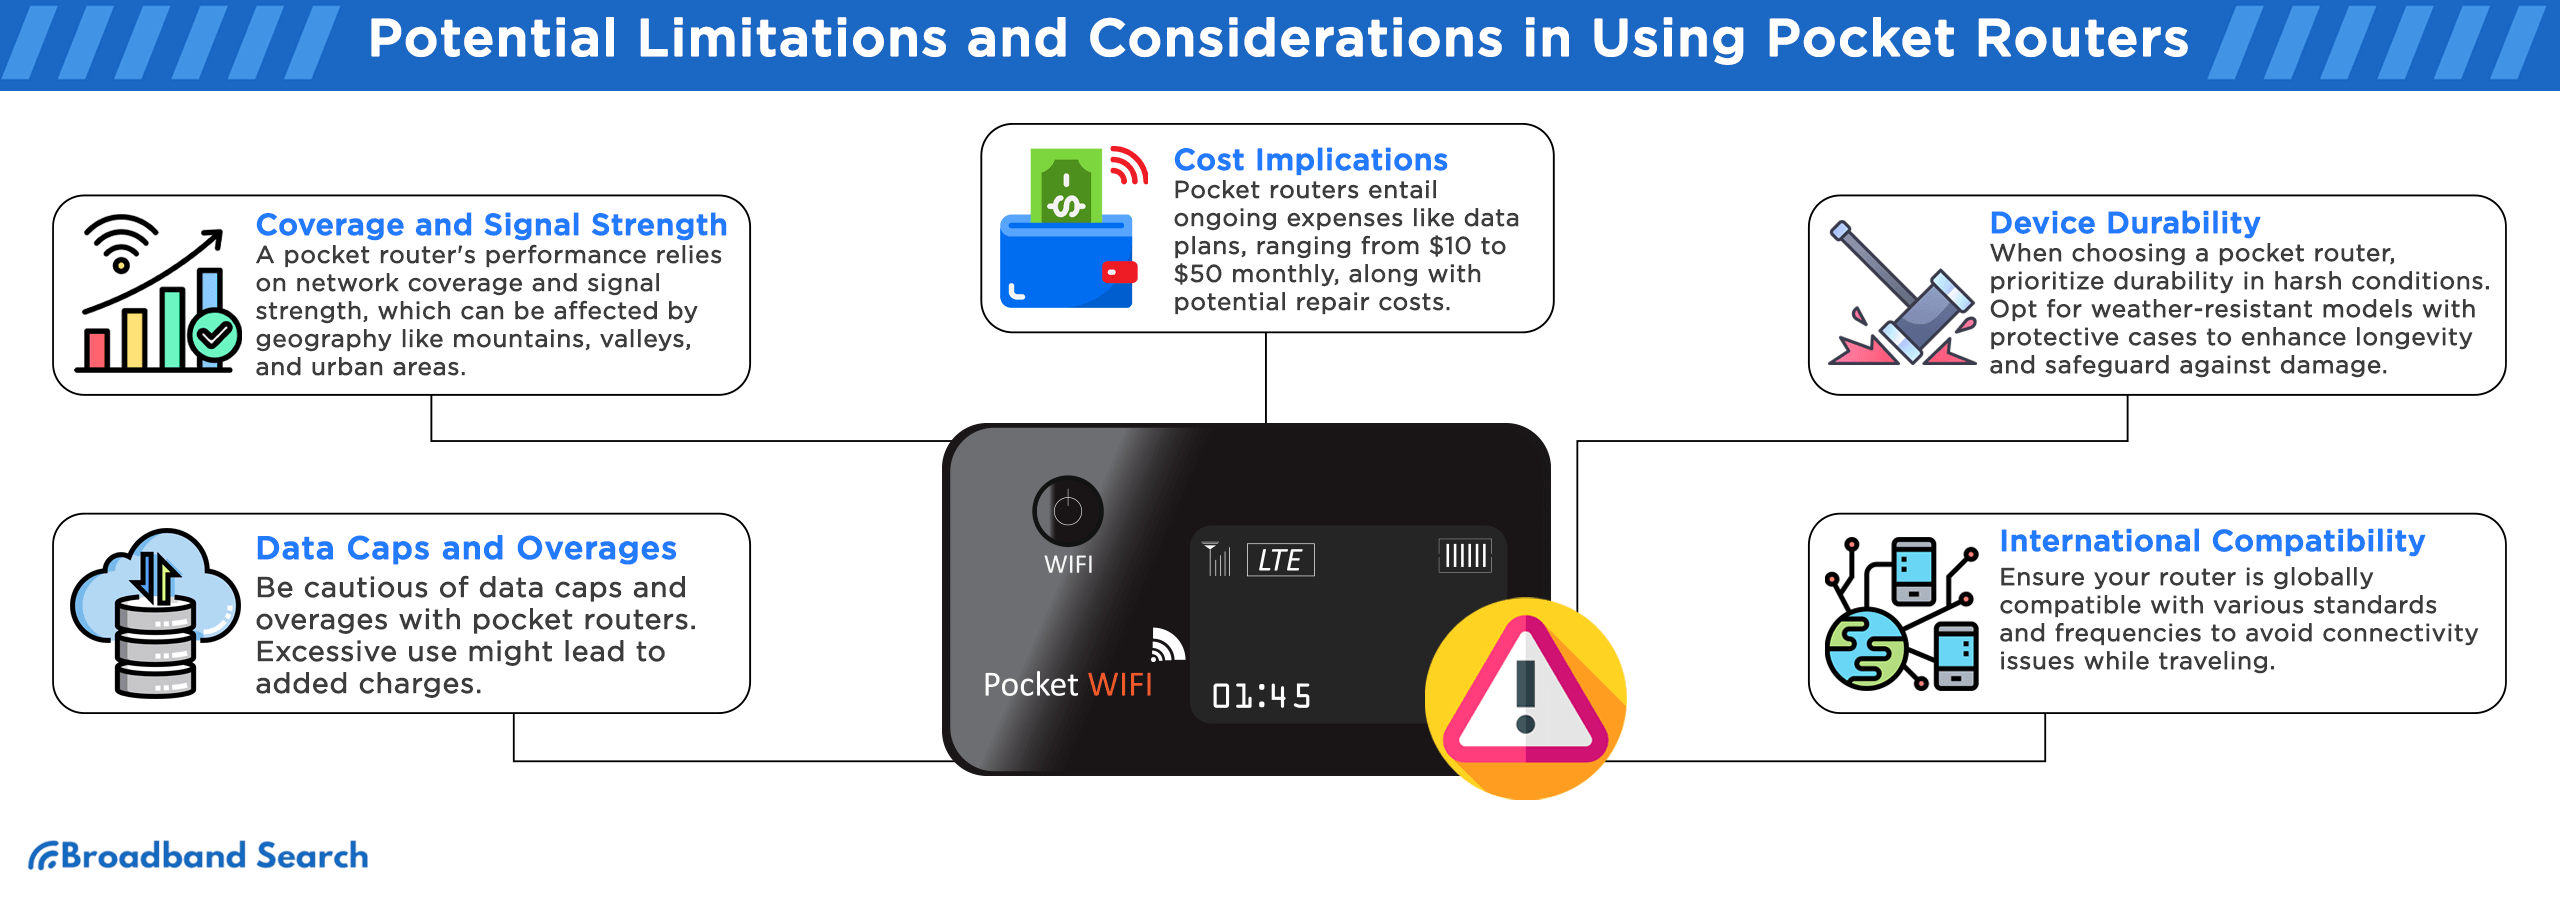 List of potential Limitations and considerations in using pocket routers